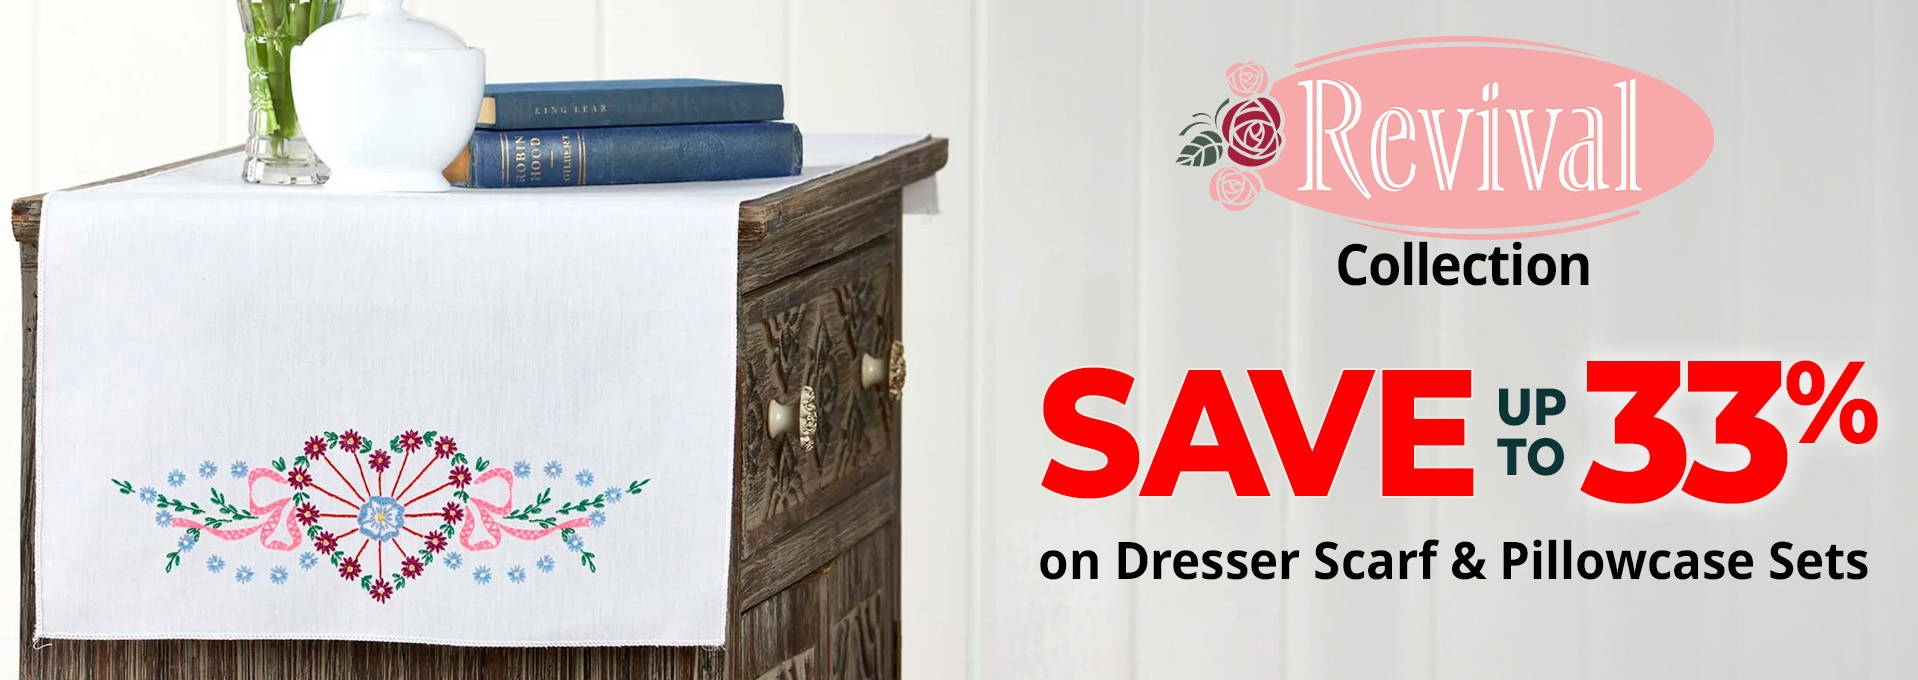 Text: Revival Collection — Save Up to 33% on Dresser Scarf & Pillowcase Sets. Image: Herrschners Josephine Dresser Scarf Stamped Embroidery.